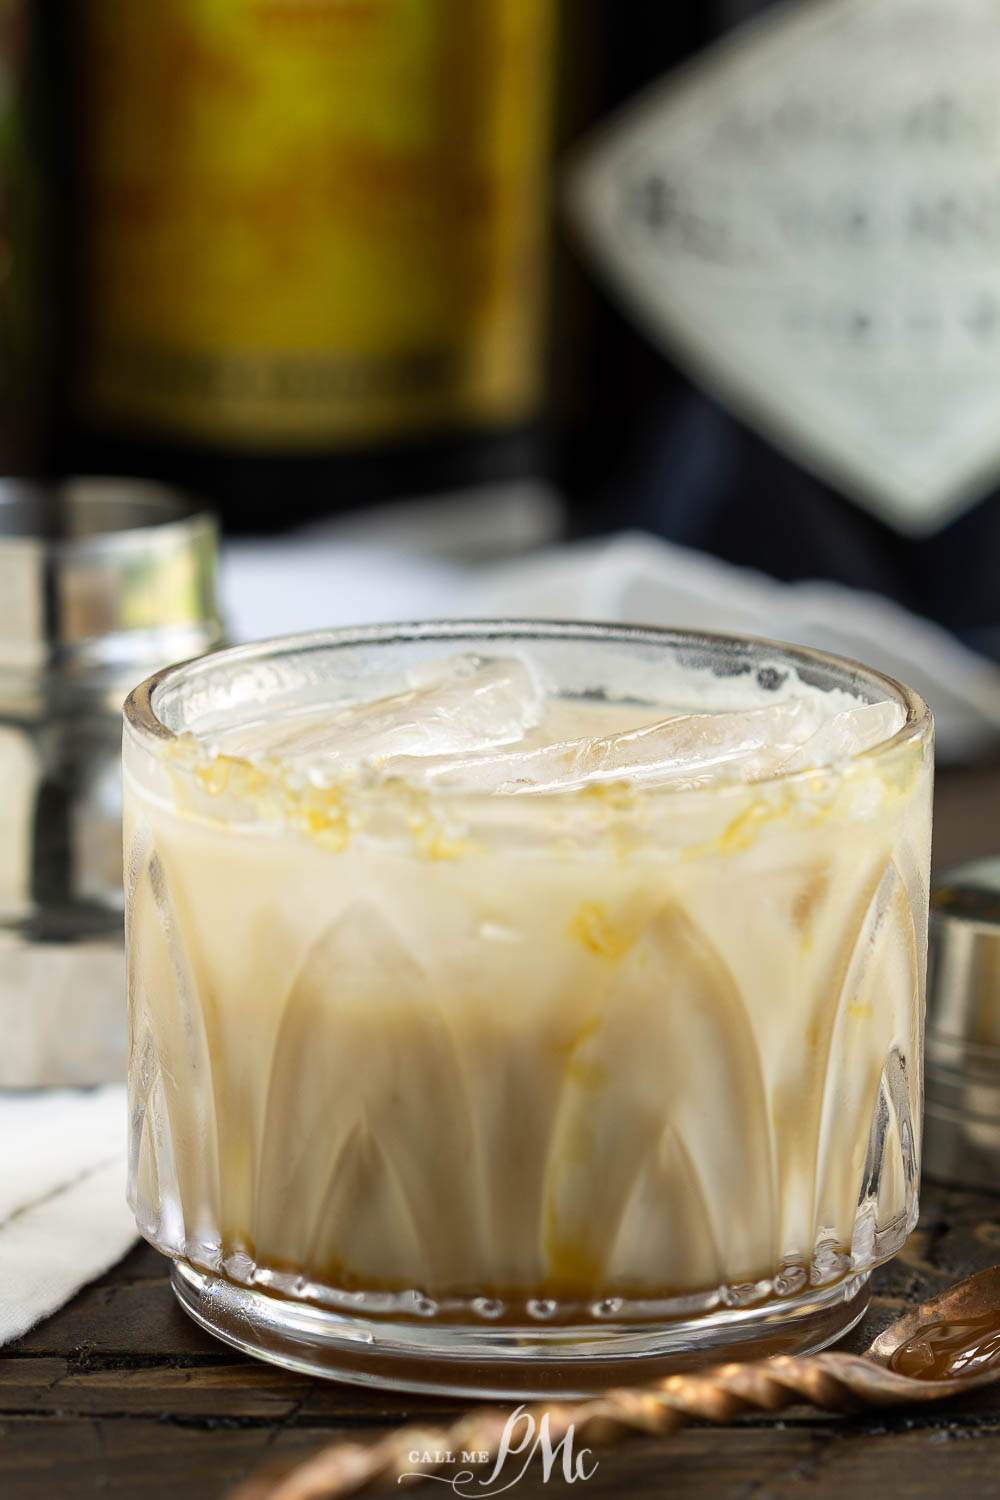 Salted Caramel White Russian is full of decadent, creamy flavor from caramel vodka, Kahlua, & cream. Sipping cocktail, dessert cocktail.